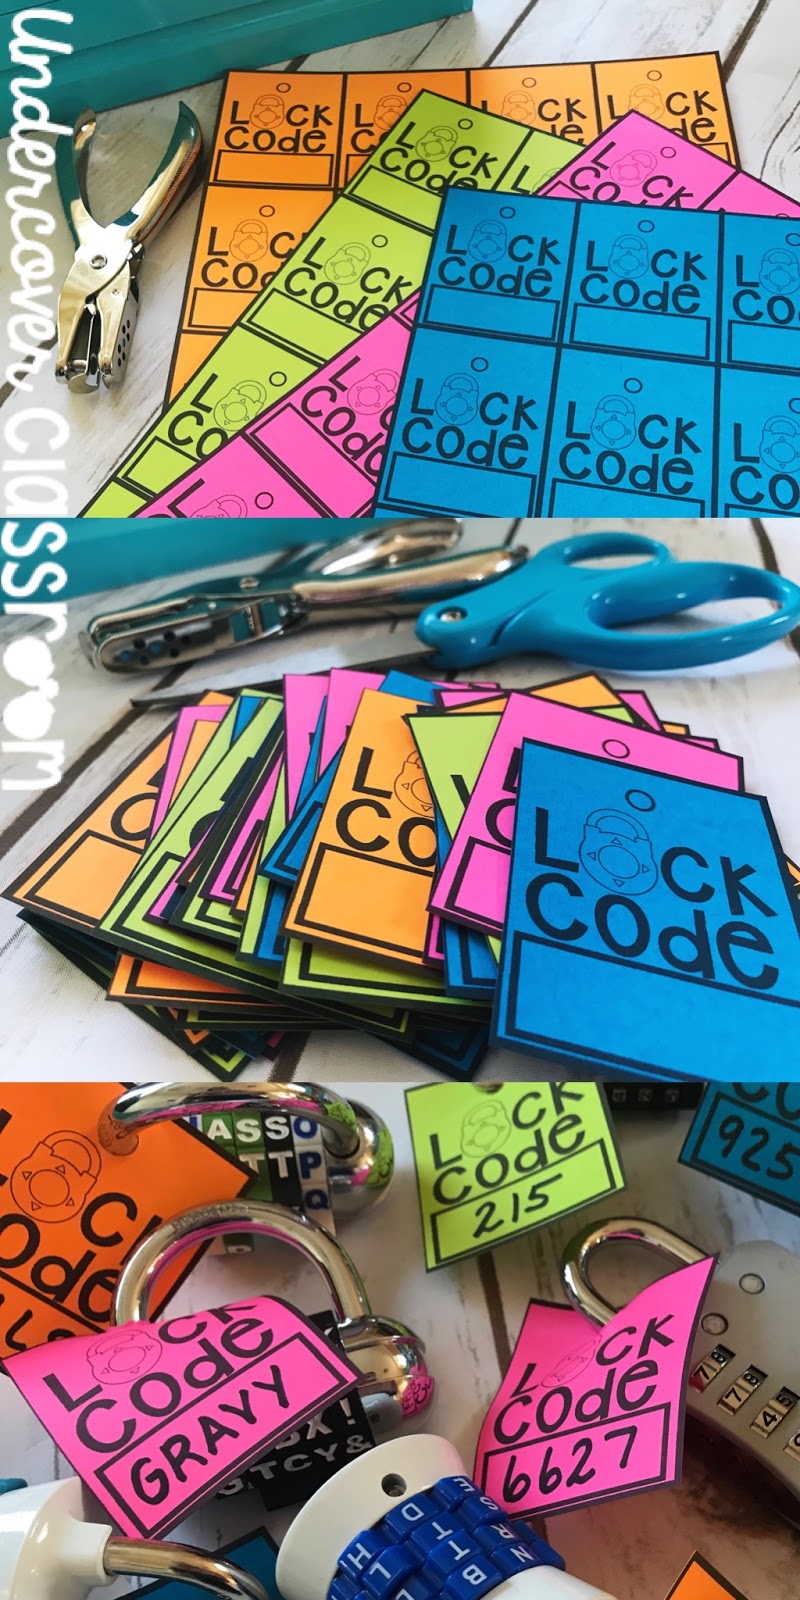 Don't get locked out of your locks! Use these lock code tags to keep your locks organized in between lockbox challenges.